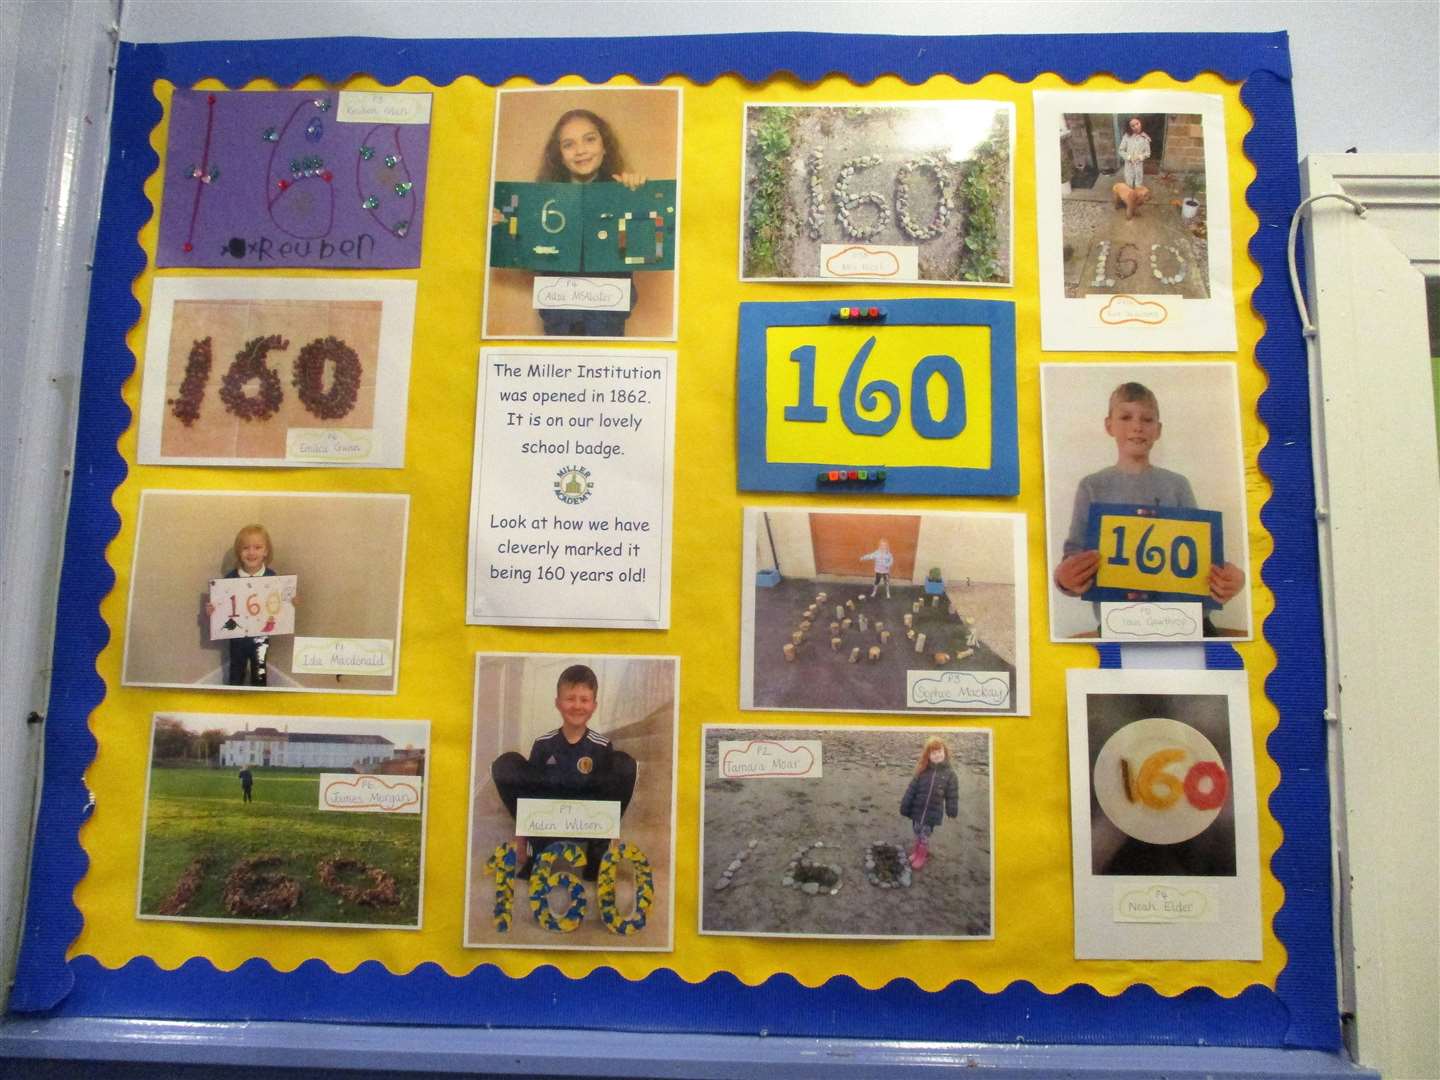 Many children contributed to the 160 years theme.